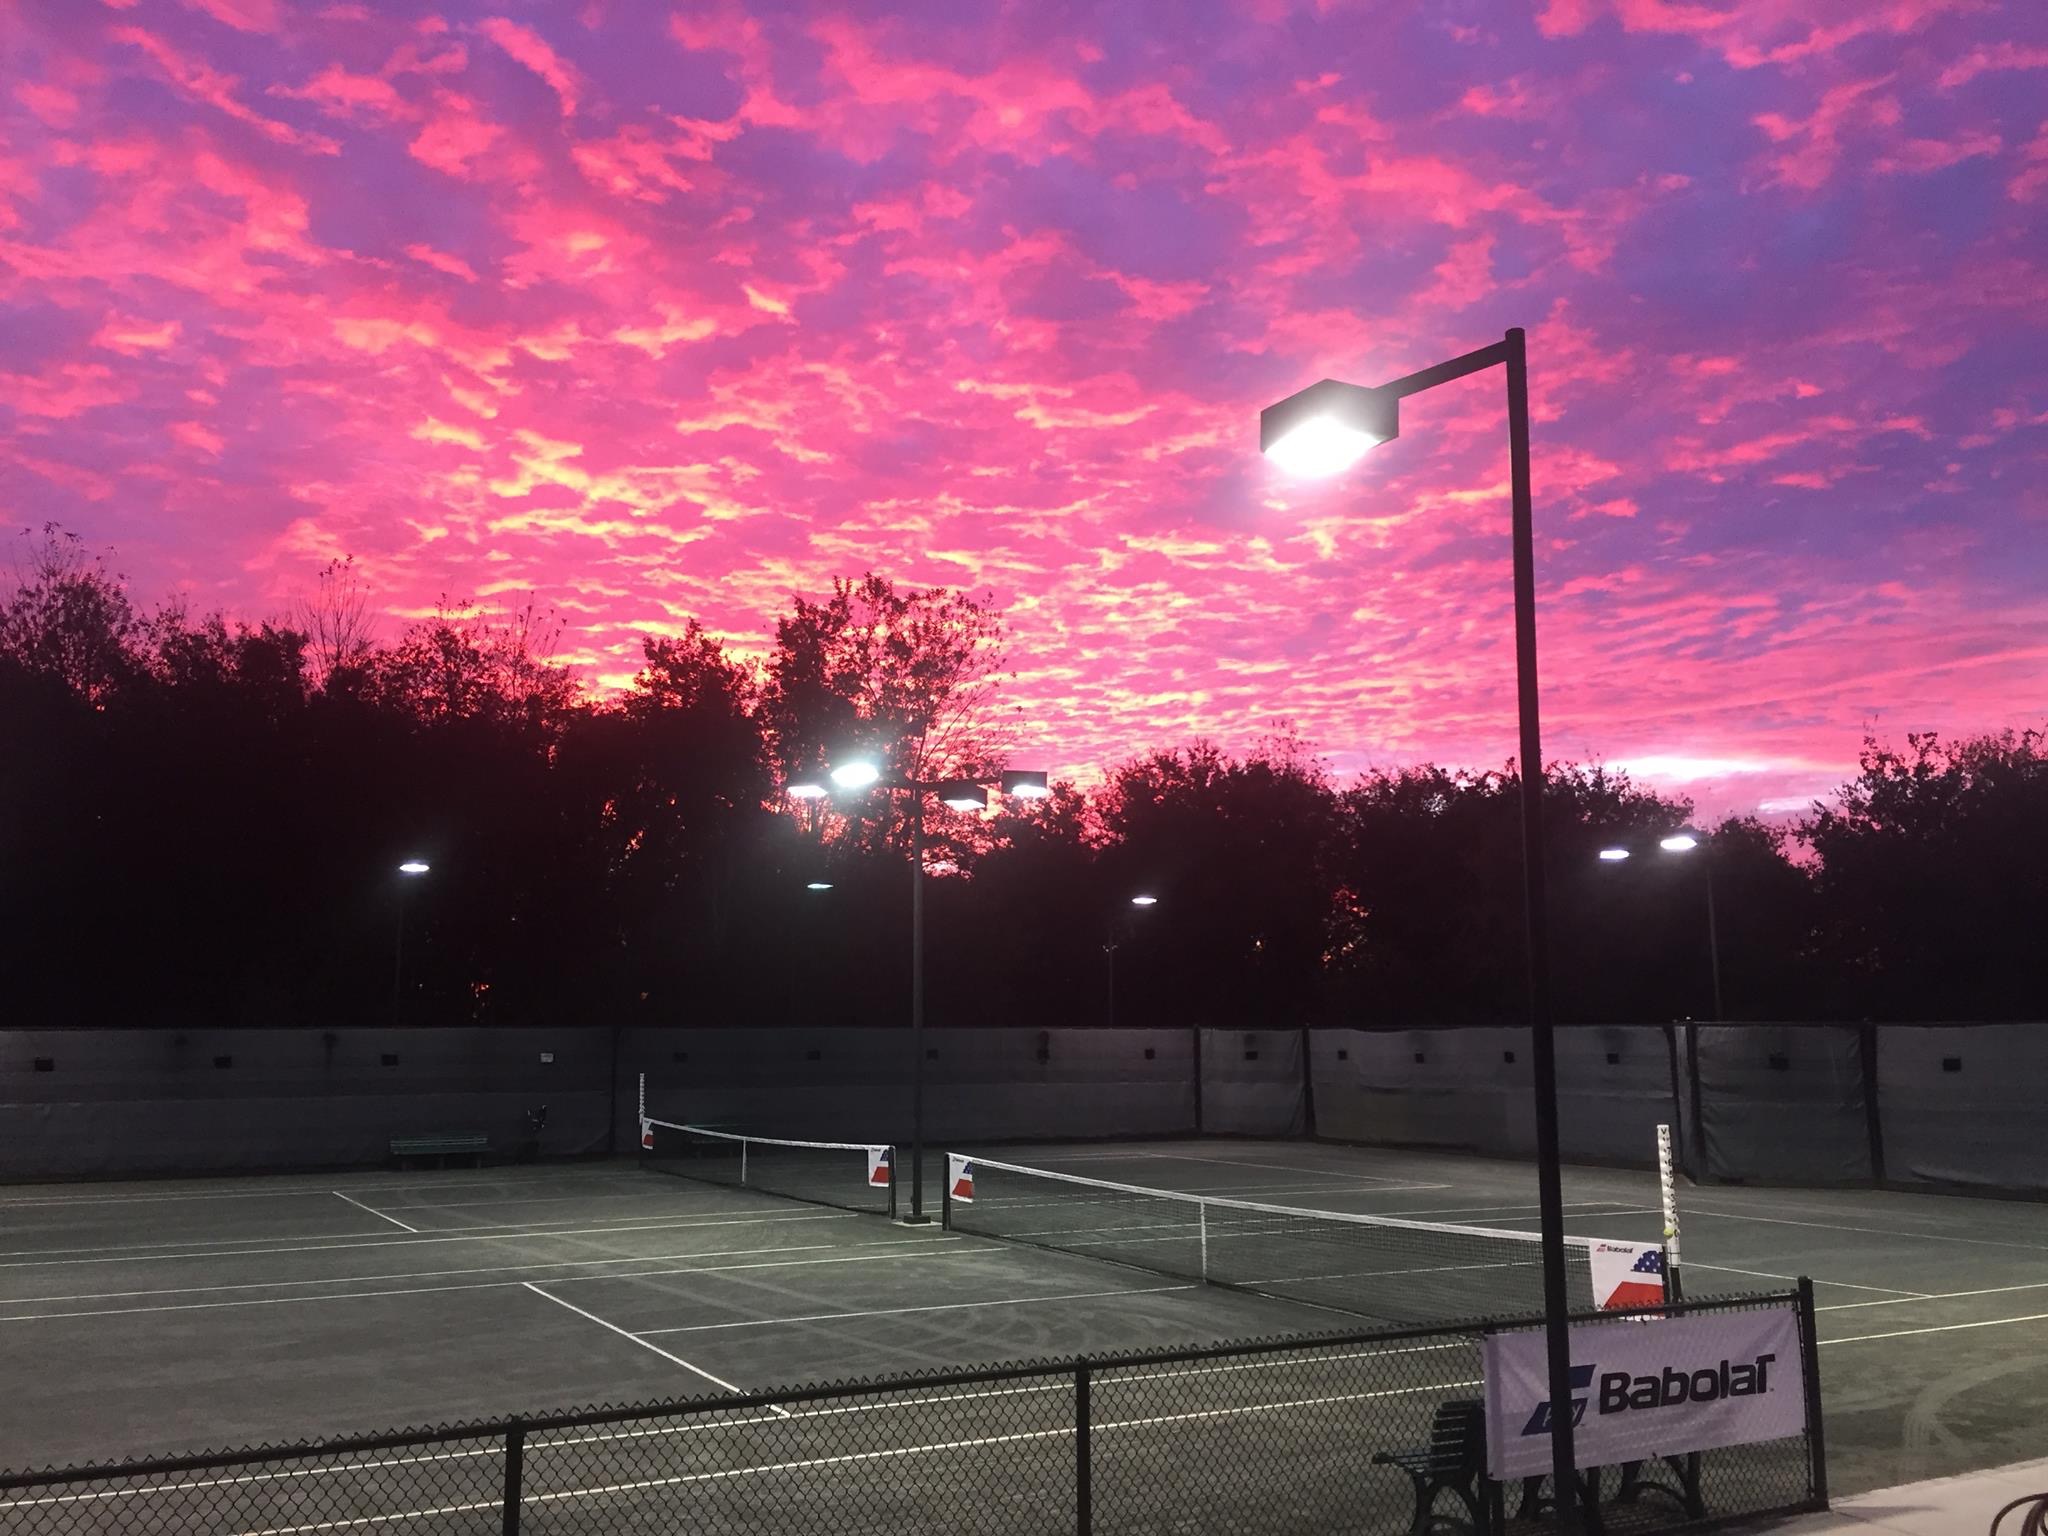 A tennis court with a beautiful sunset in the background - Tennis